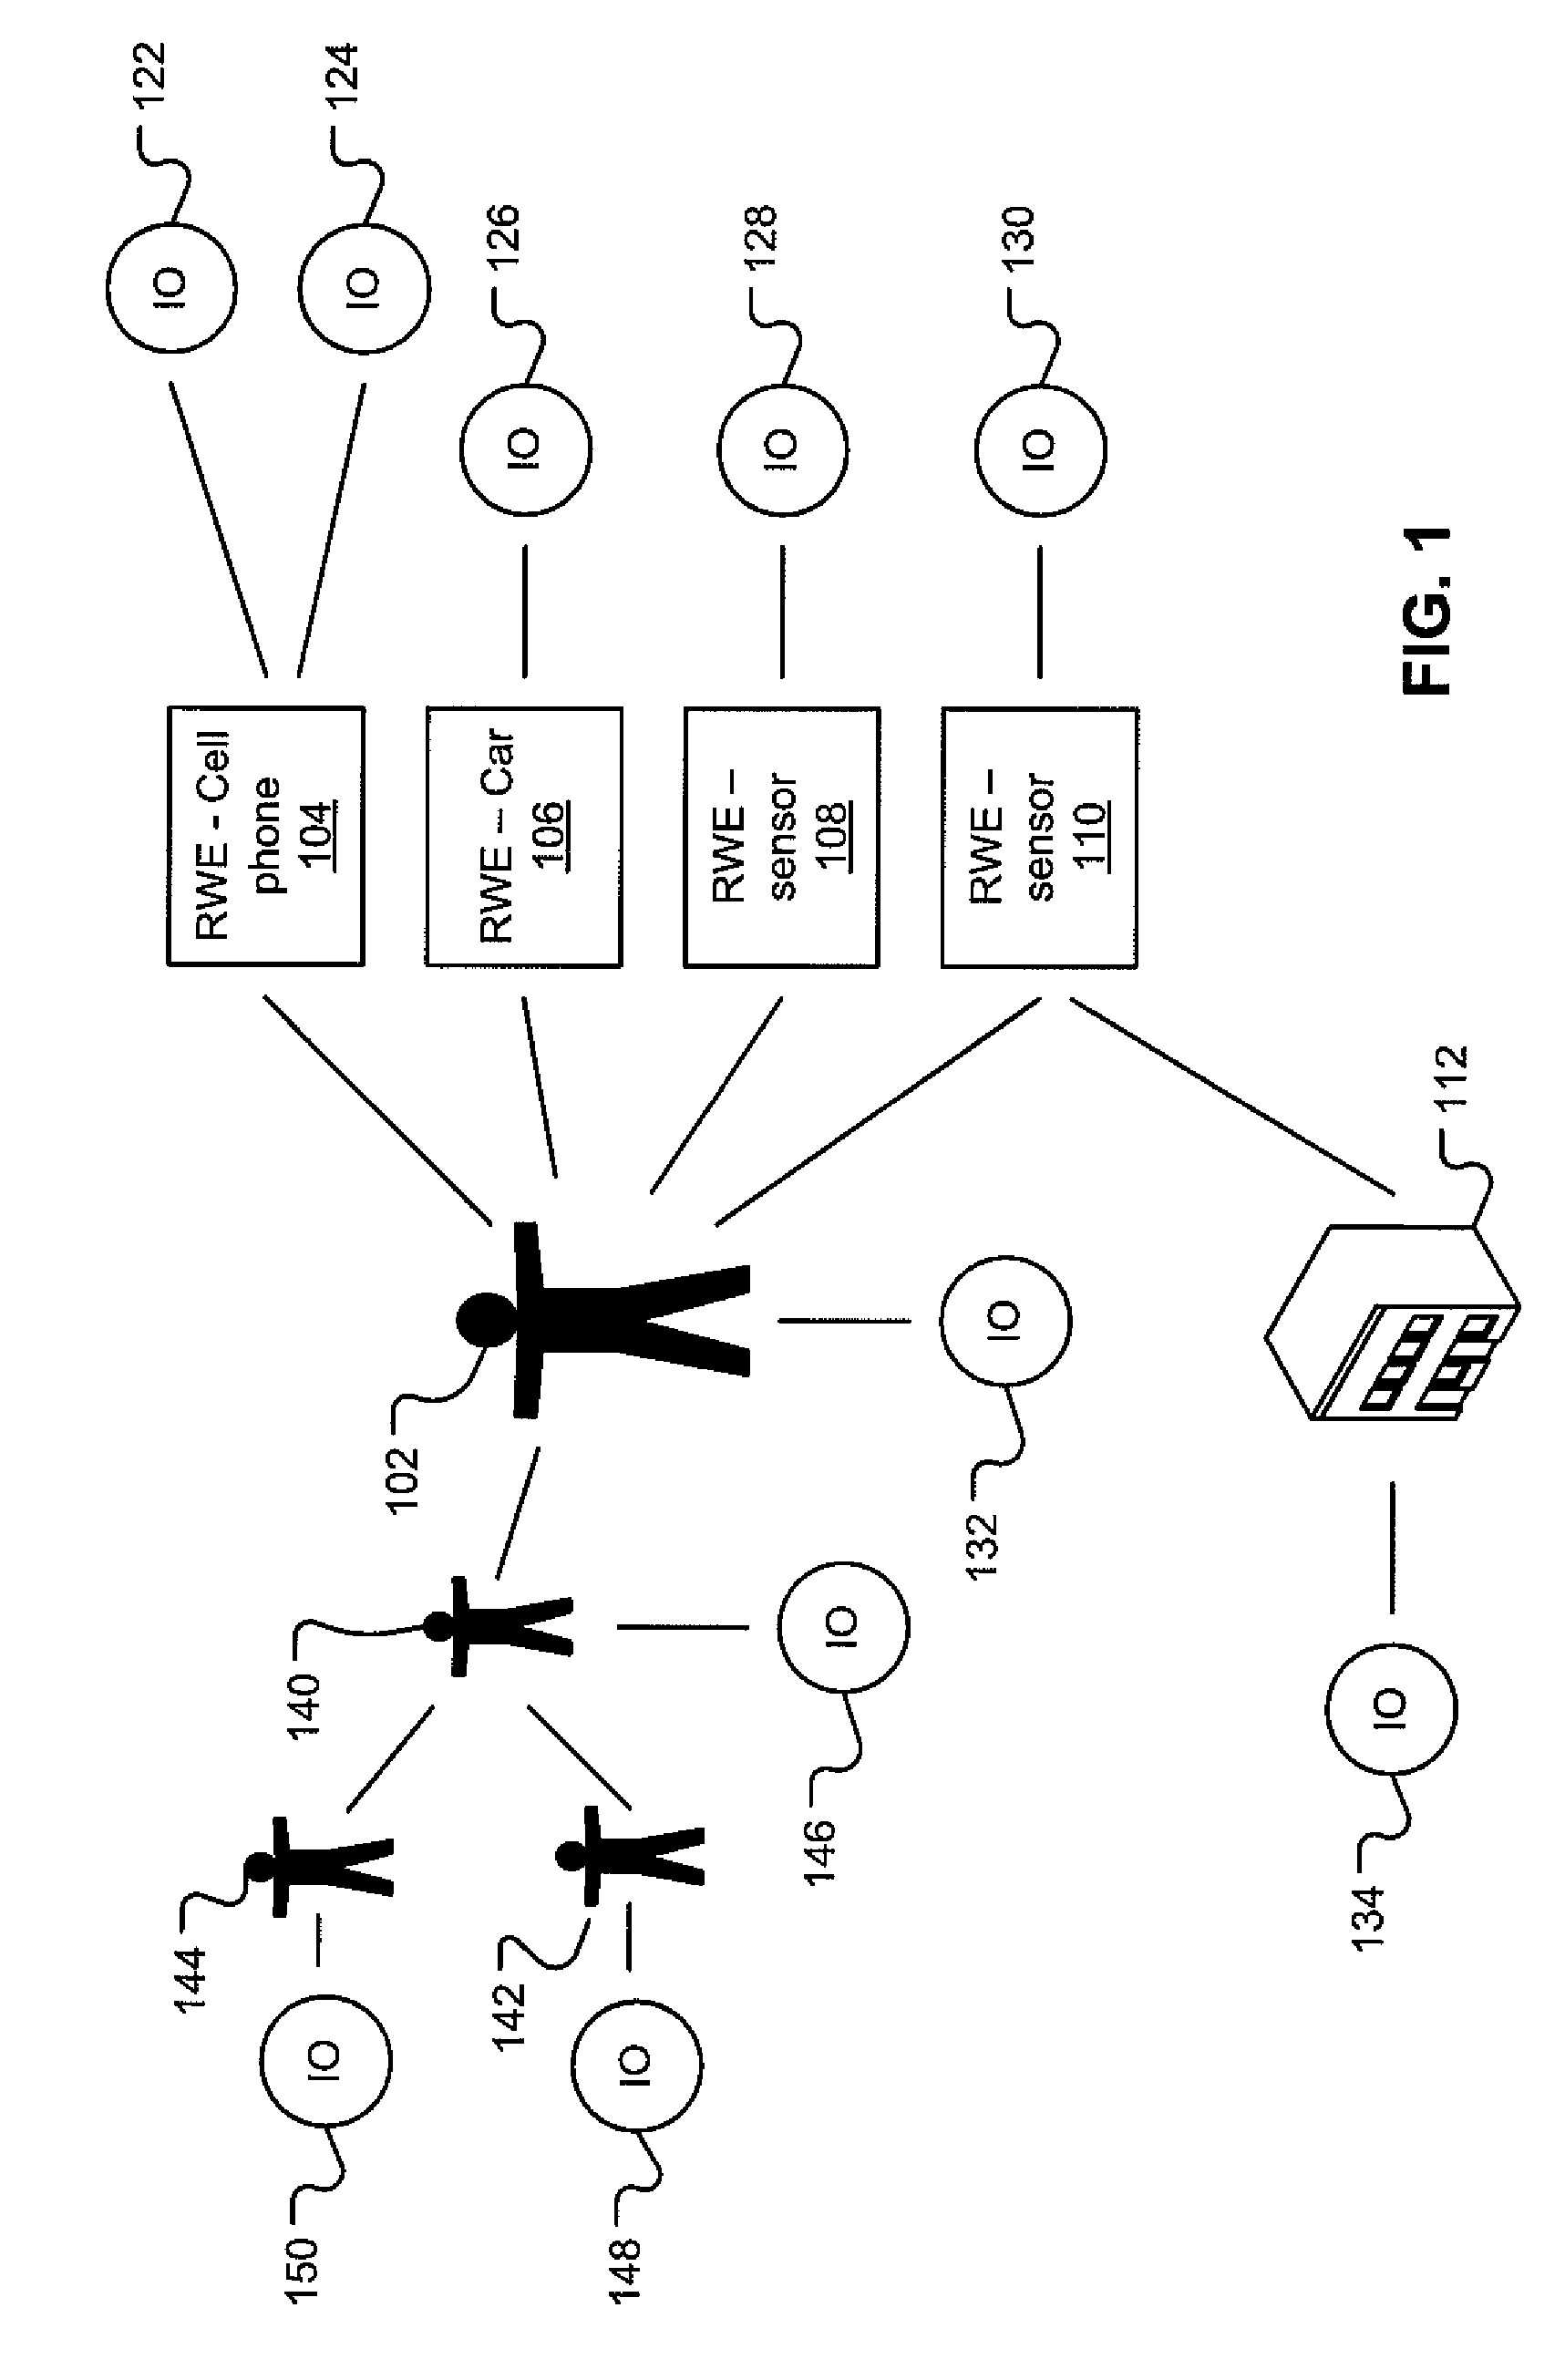 System and method for URL based query for retrieving data related to a context